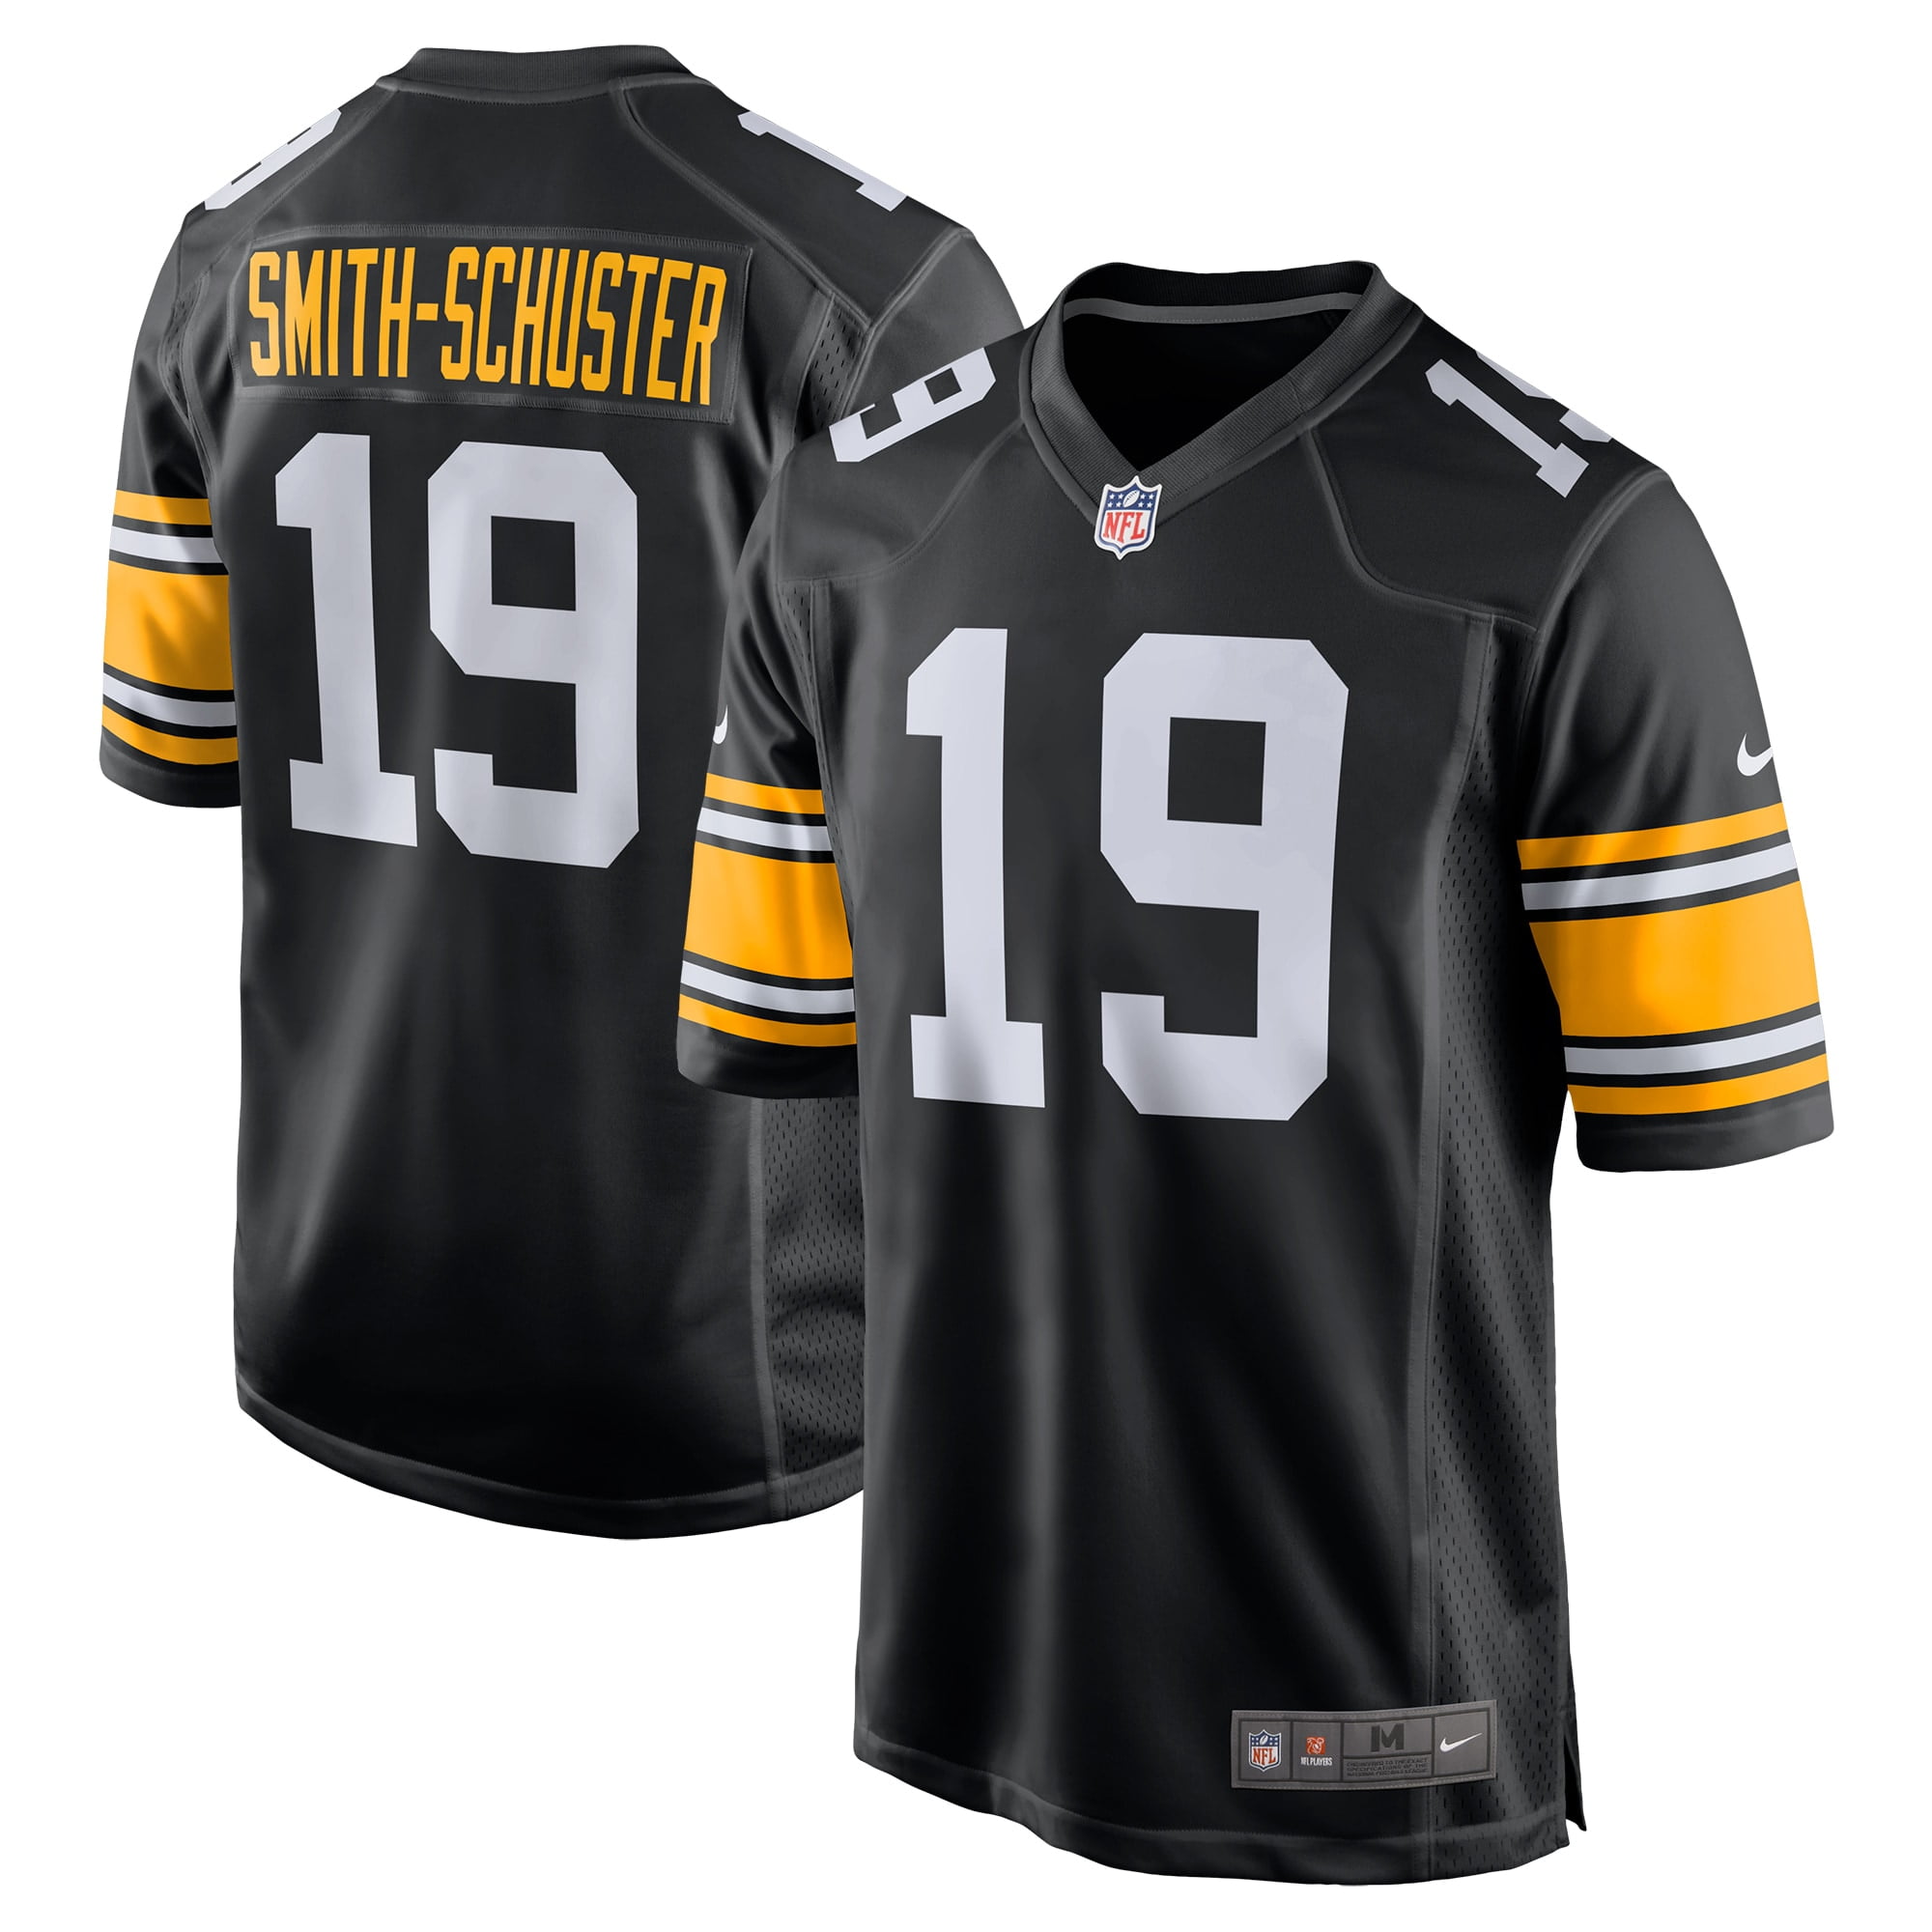 youth smith schuster jersey